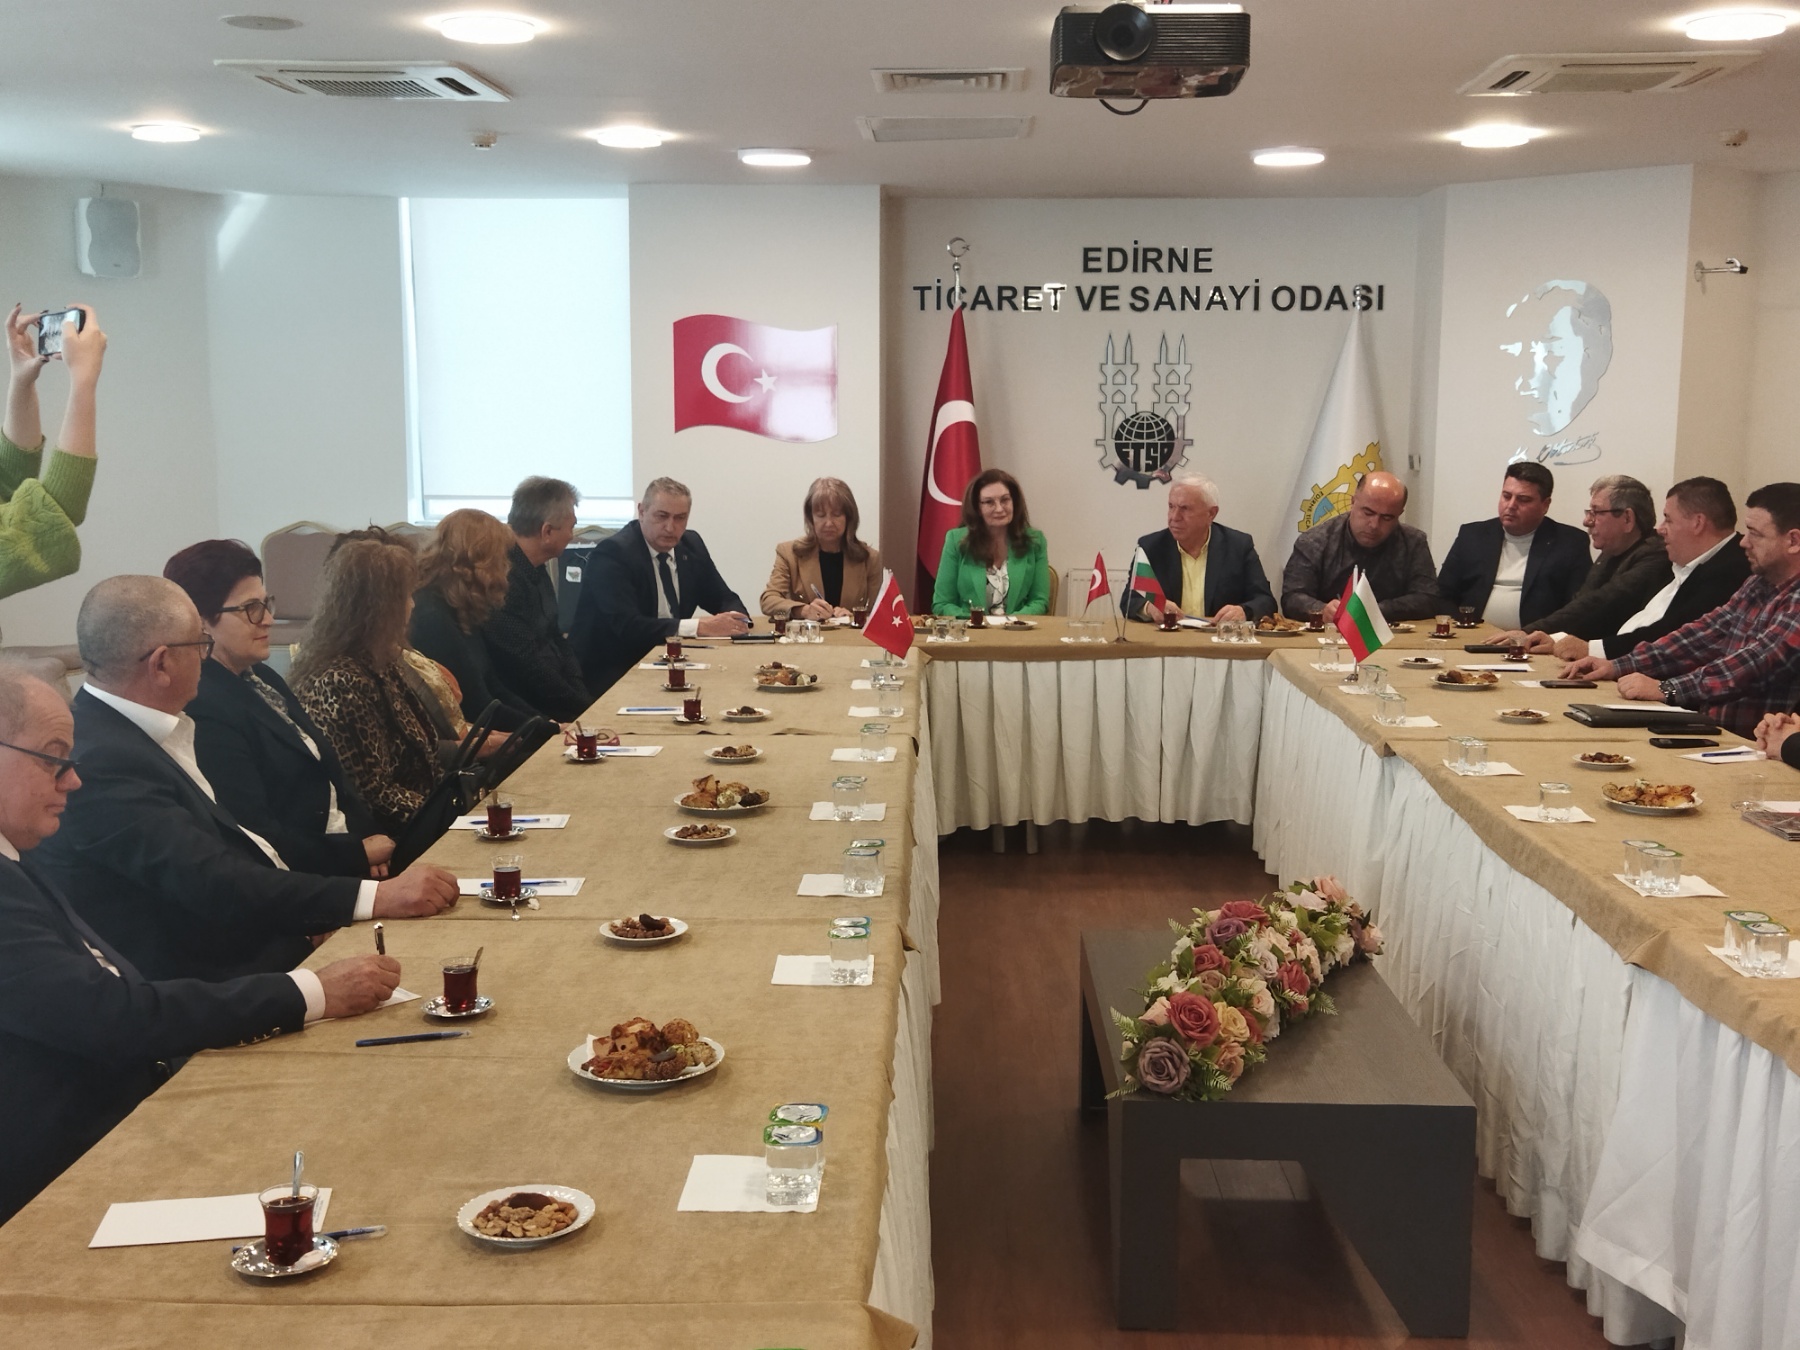 A delegation from Plovdiv visited and met with businesses from the cities of Edirne and Chorlu